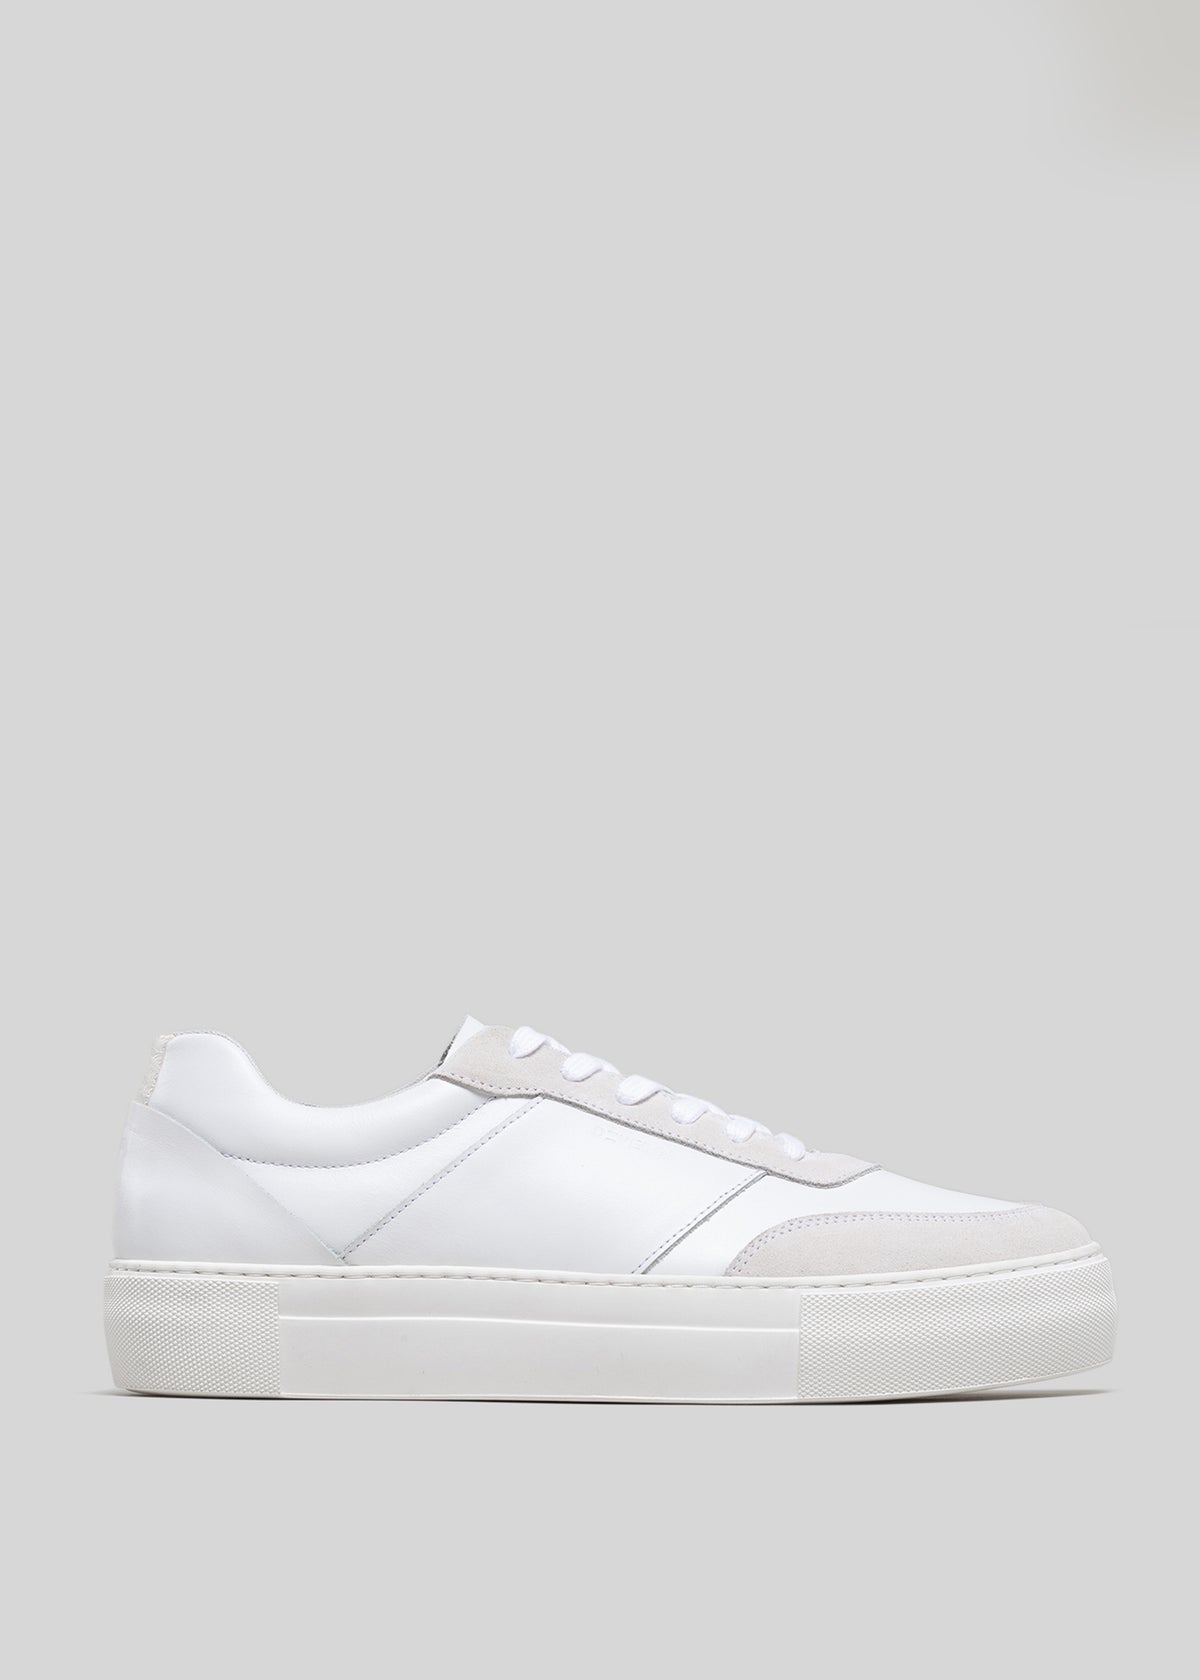 A side view of a Start with a White Canvas Vegan low top sneaker with a lace-up front, and a thick white rubber sole, displayed against a light gray background.